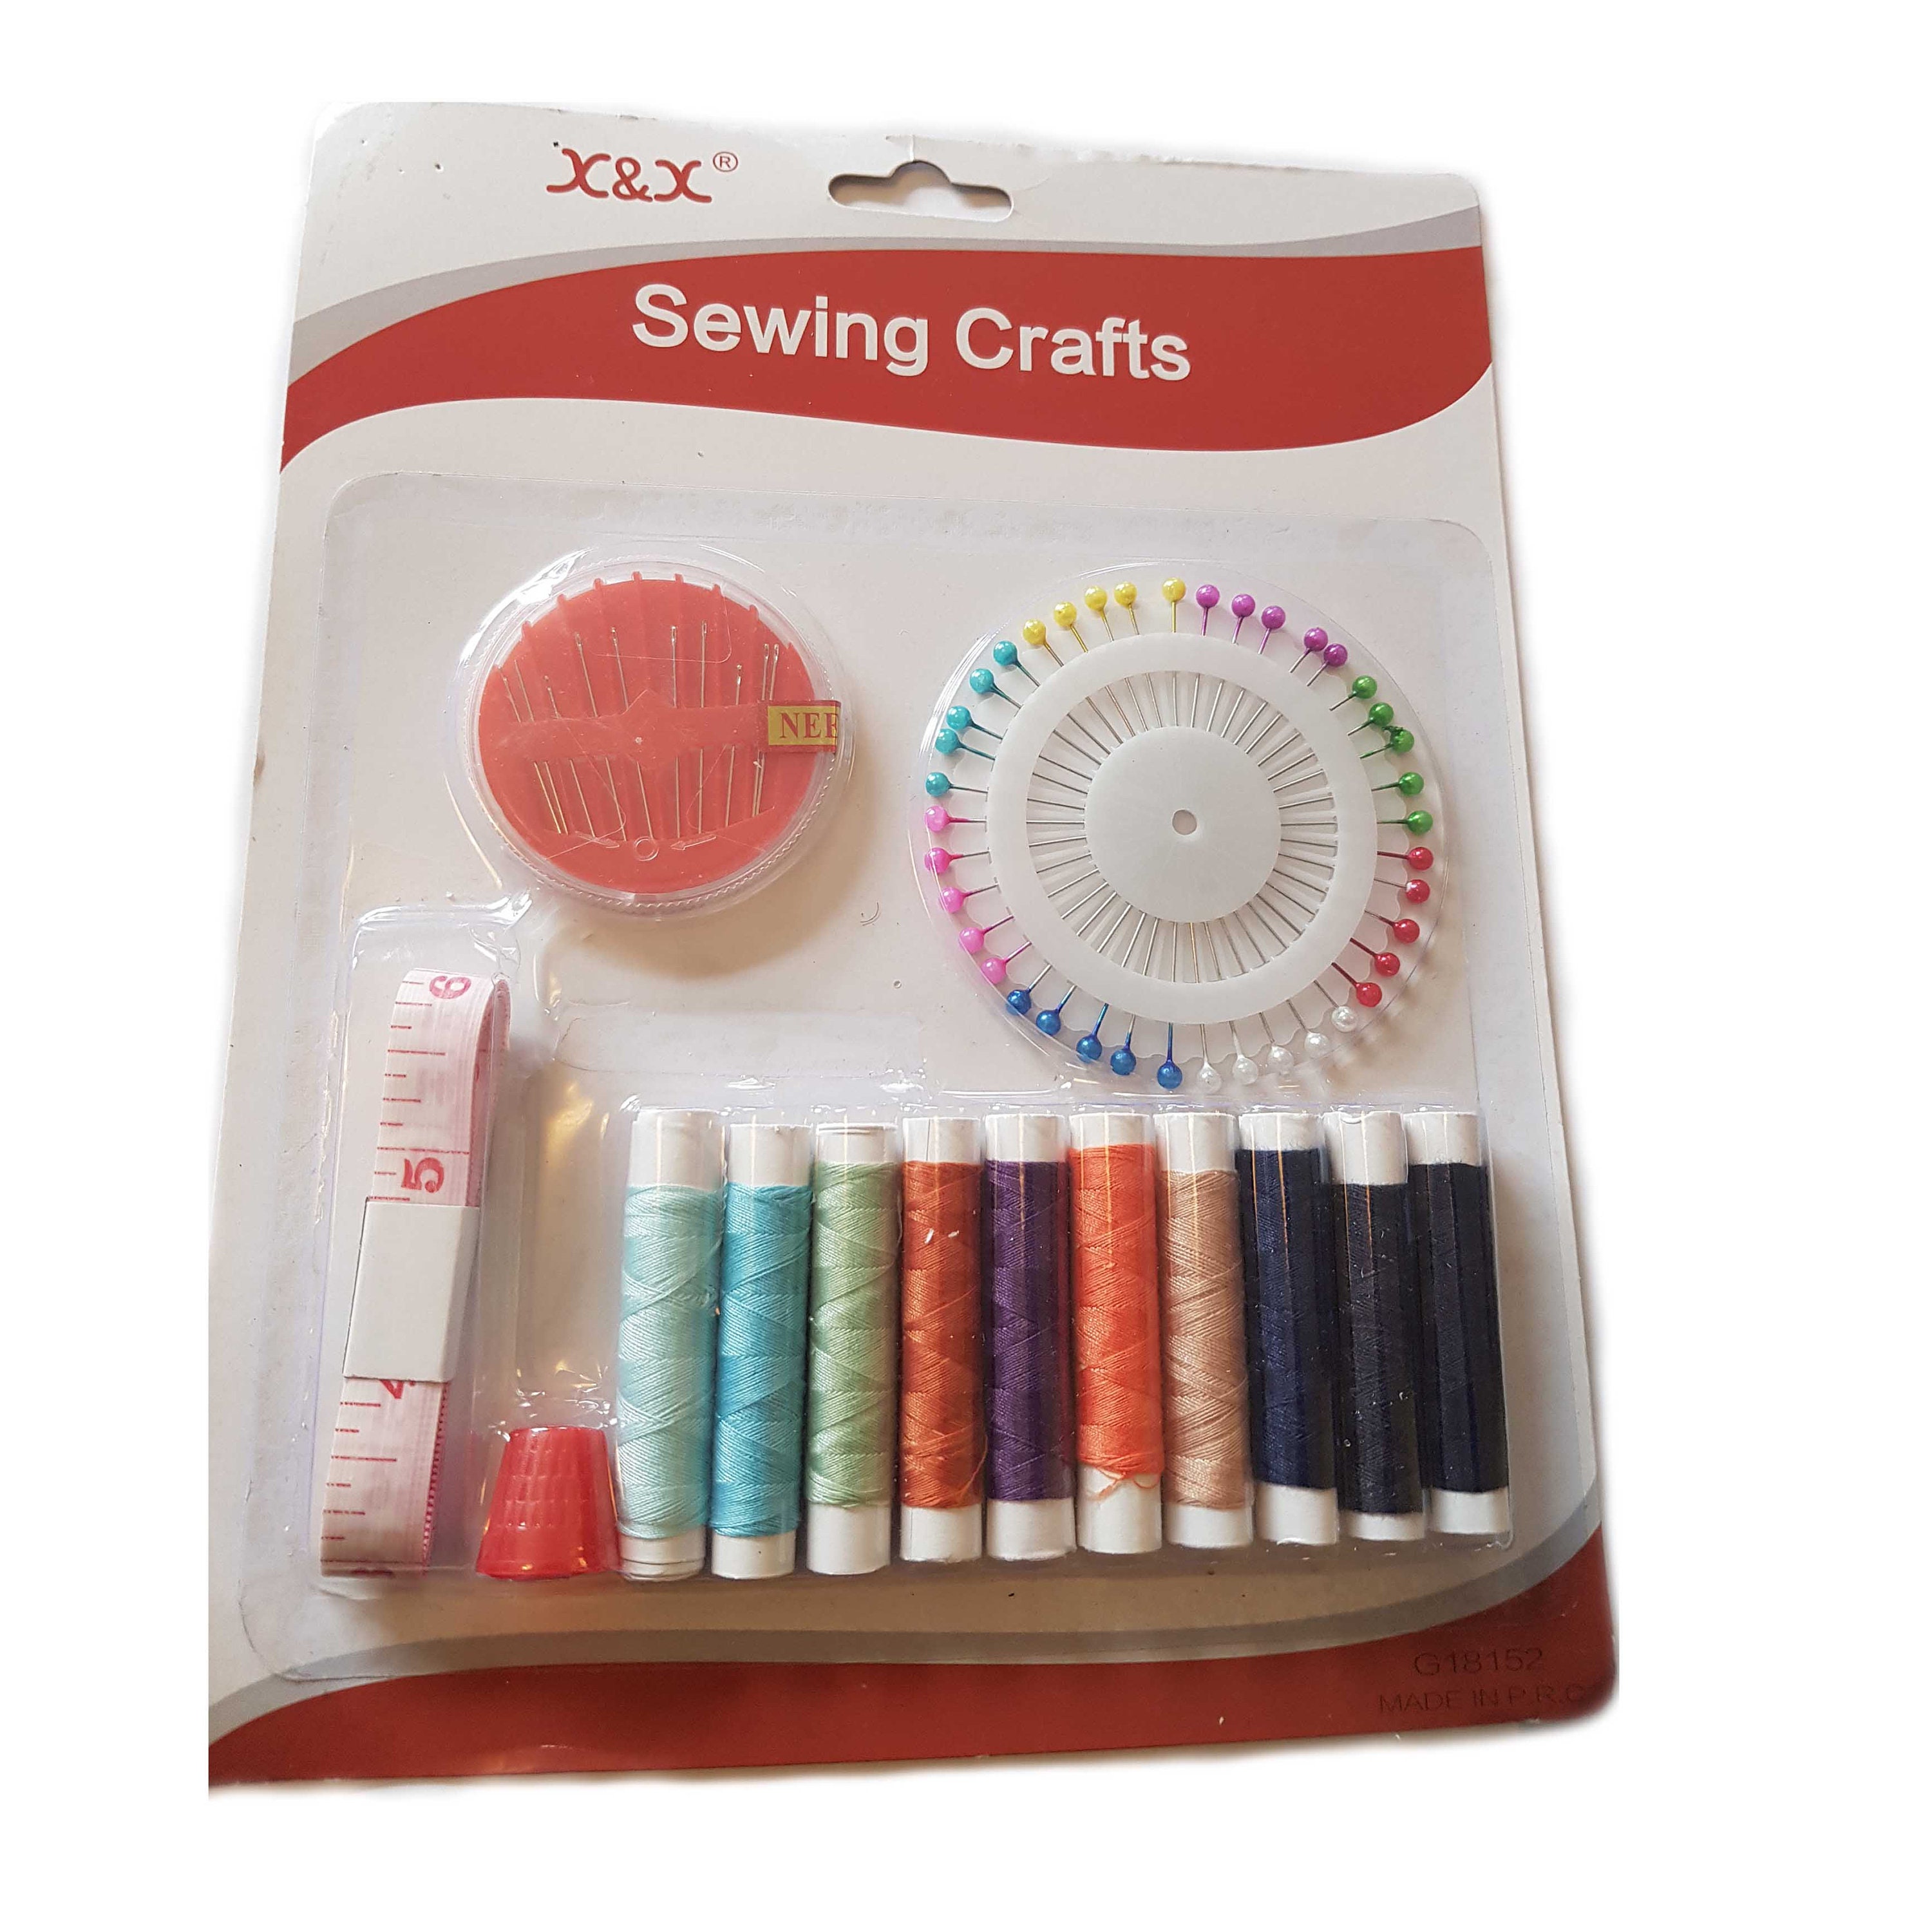 66 Piece Sewing & Knitting Starter Kit, Needles and Crochet Hooks, 38  Thread Spools, Buttons, Beginner's Set, Crafting Tools, Black Case